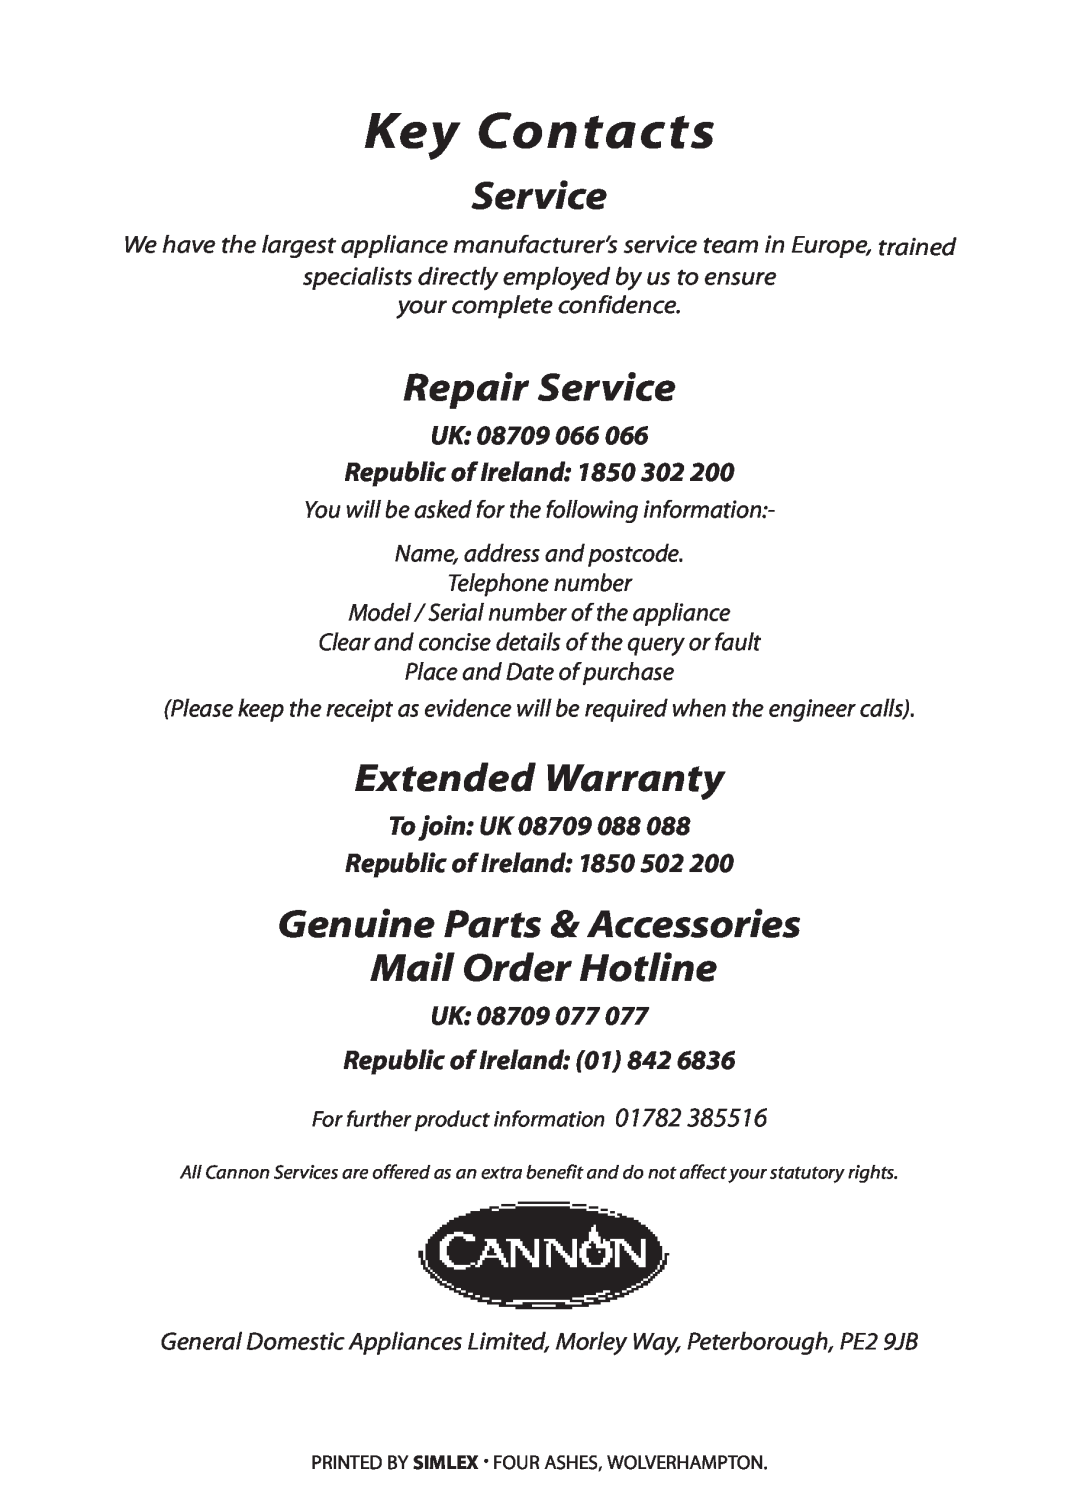 Cannon 10512G, 10515G Key Contacts, Repair Service, Extended Warranty, Genuine Parts & Accessories Mail Order Hotline 